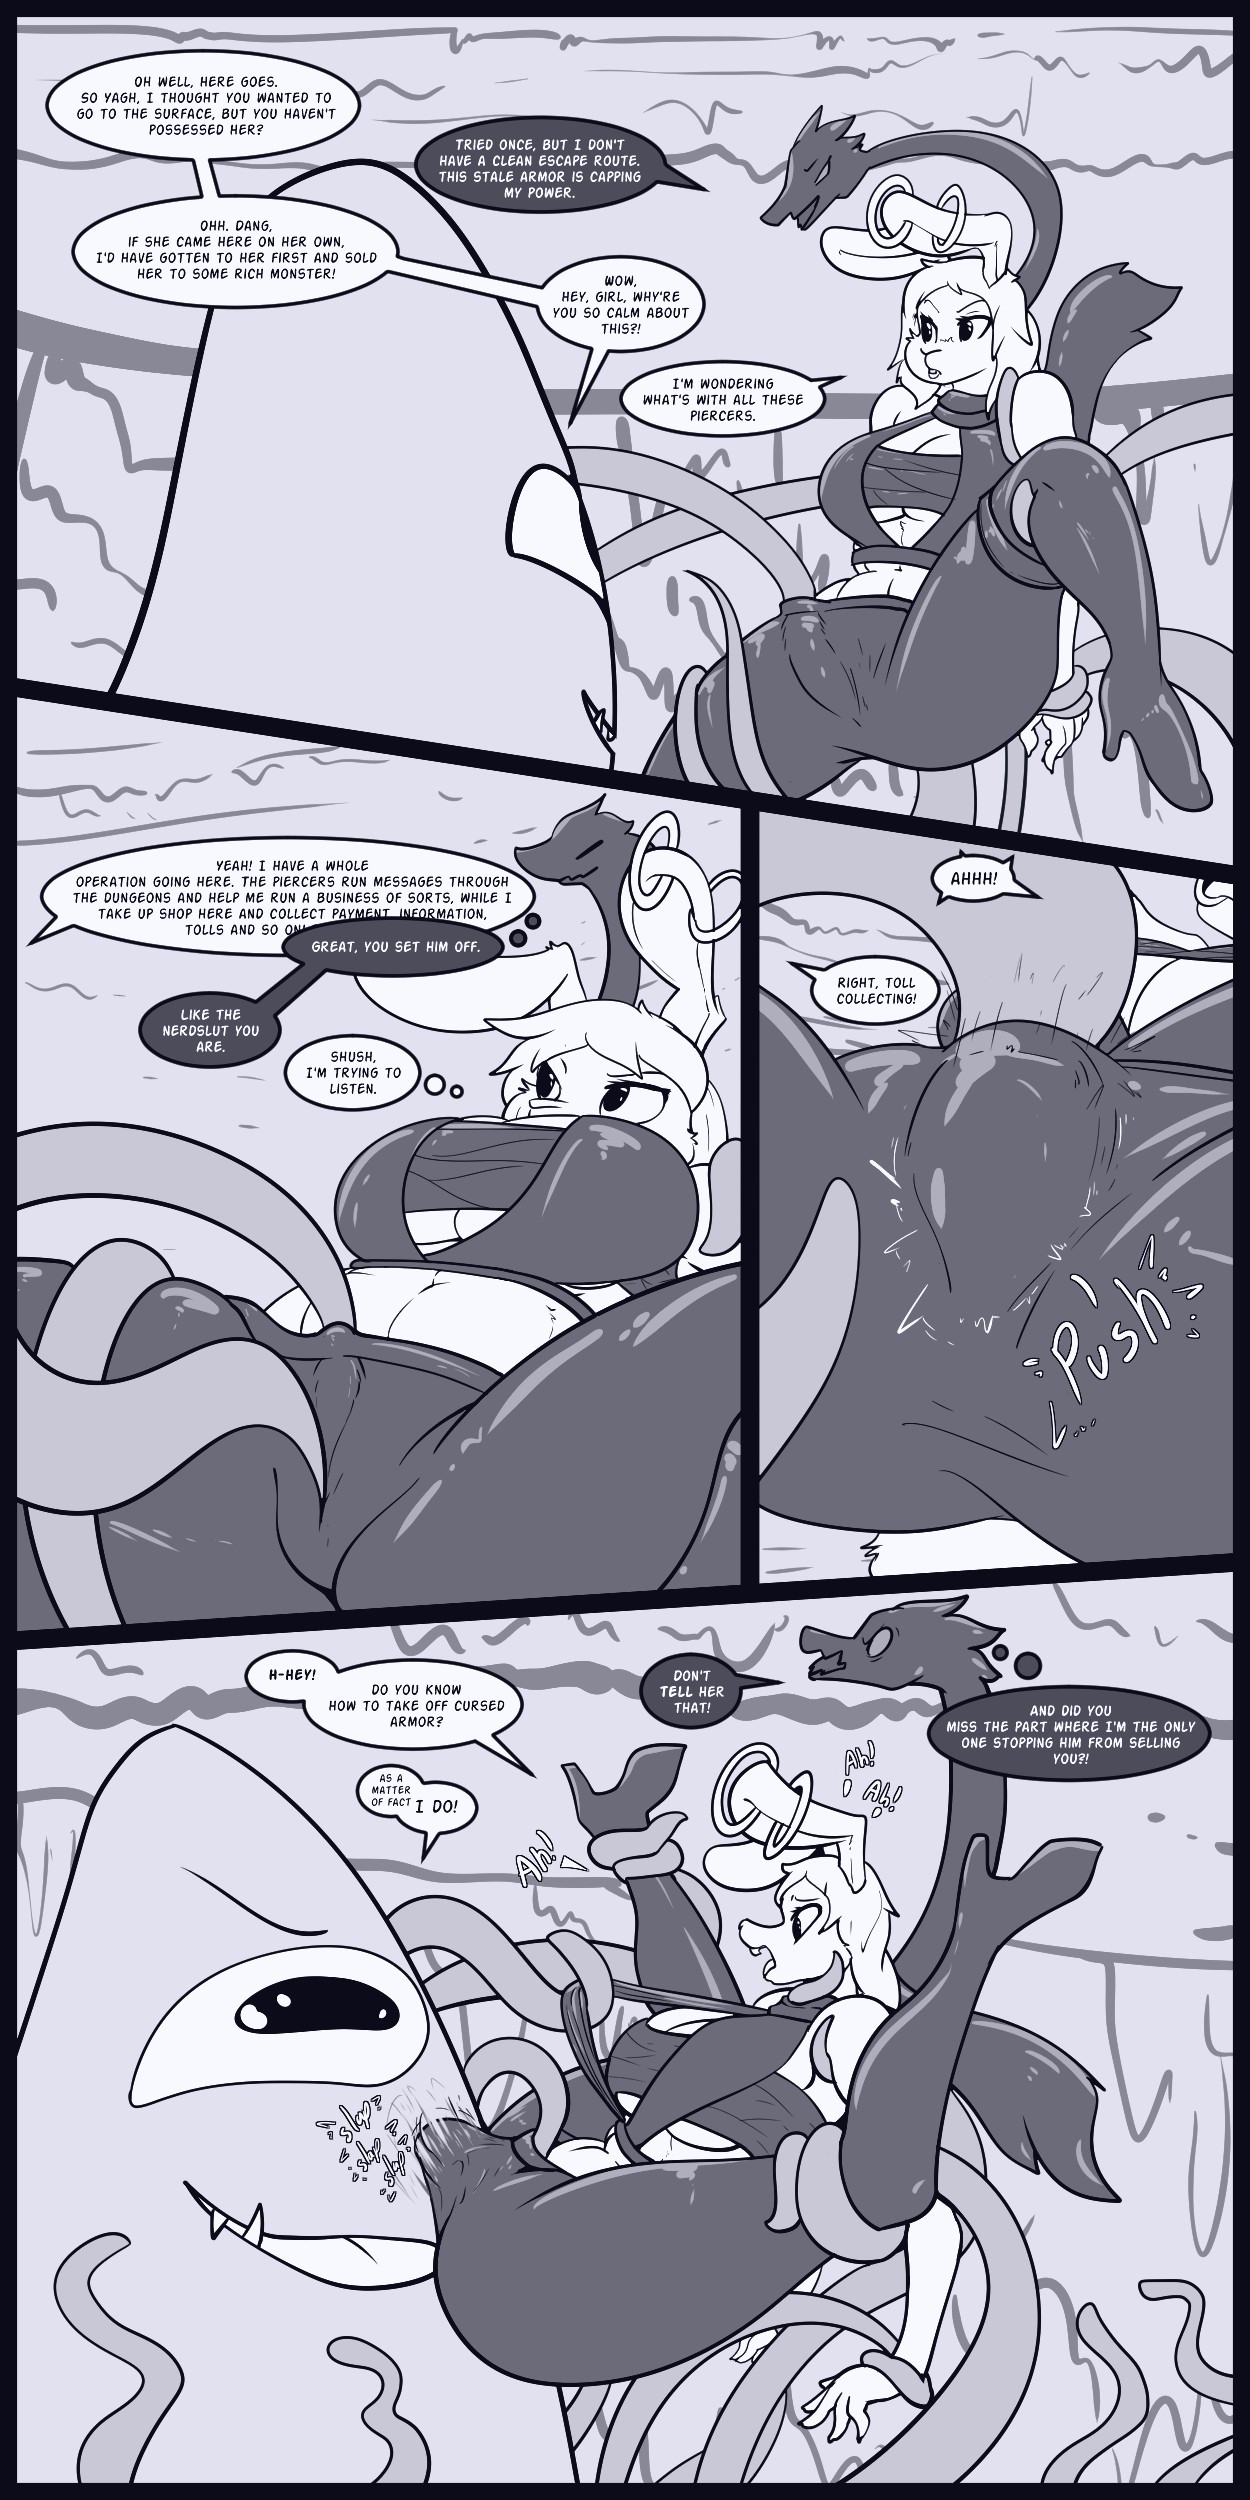 Rough Situation 2 page 06